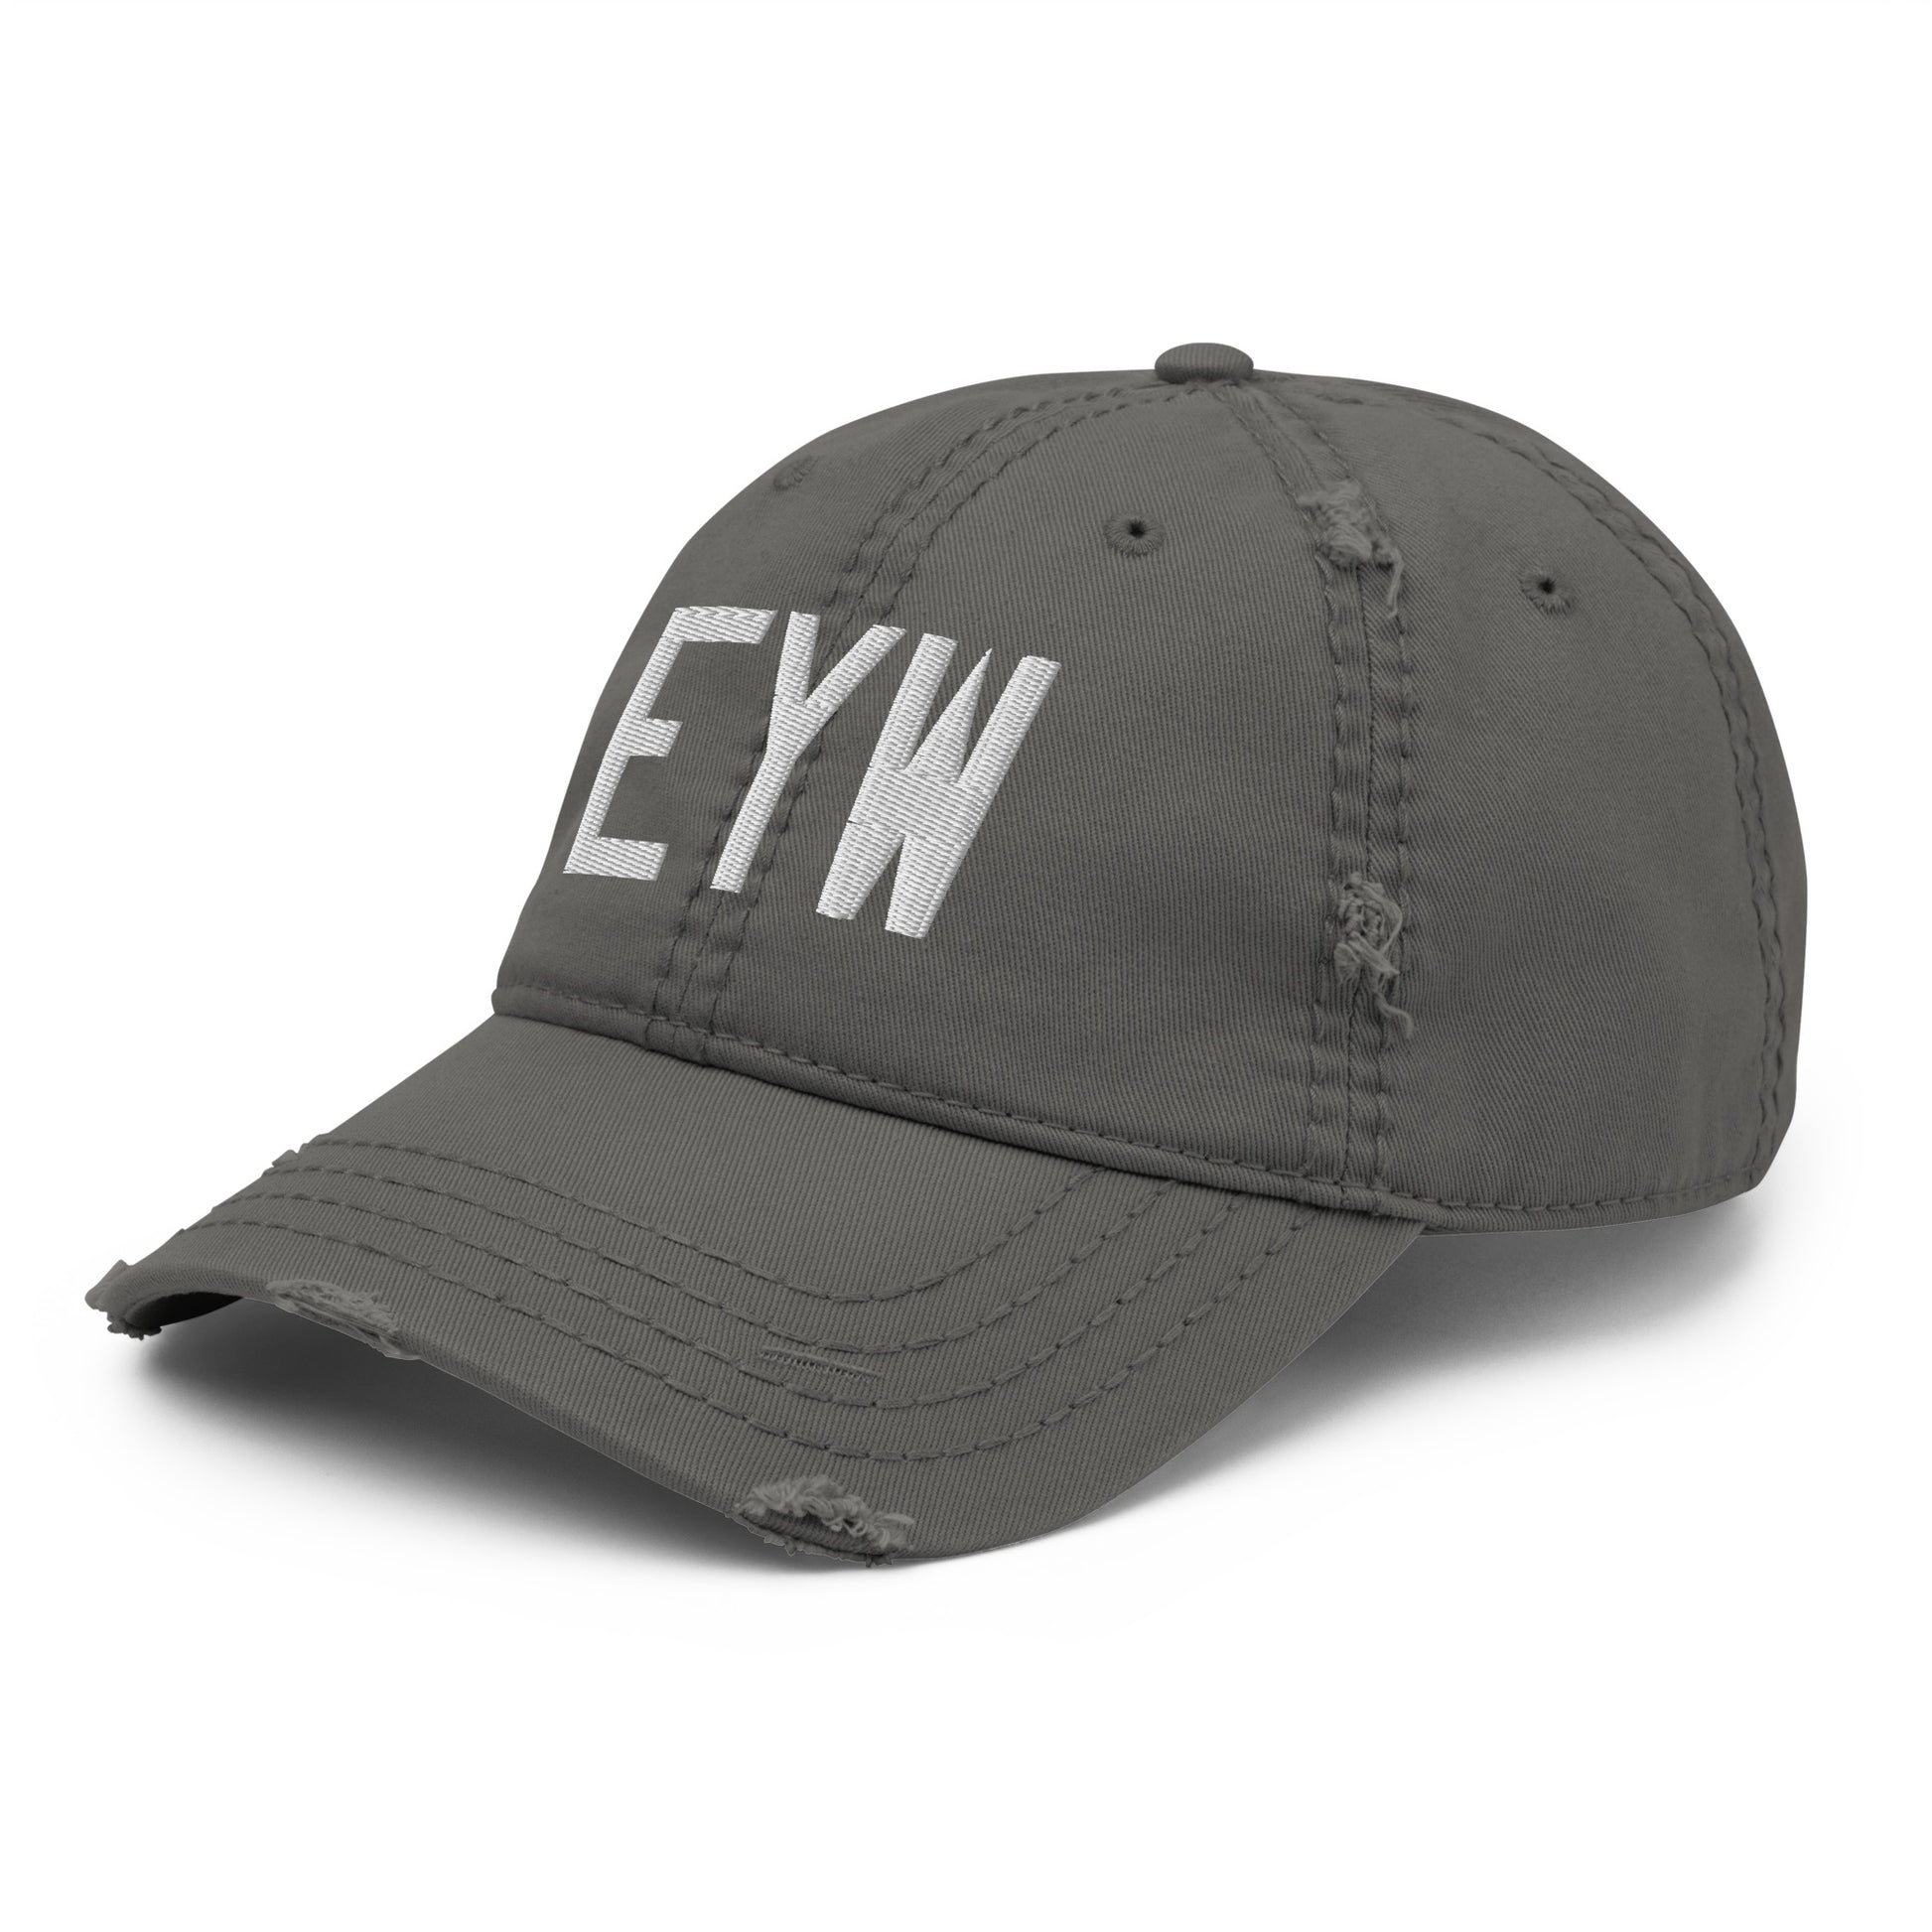 Airport Code Distressed Hat - White • EYW Key West • YHM Designs - Image 16